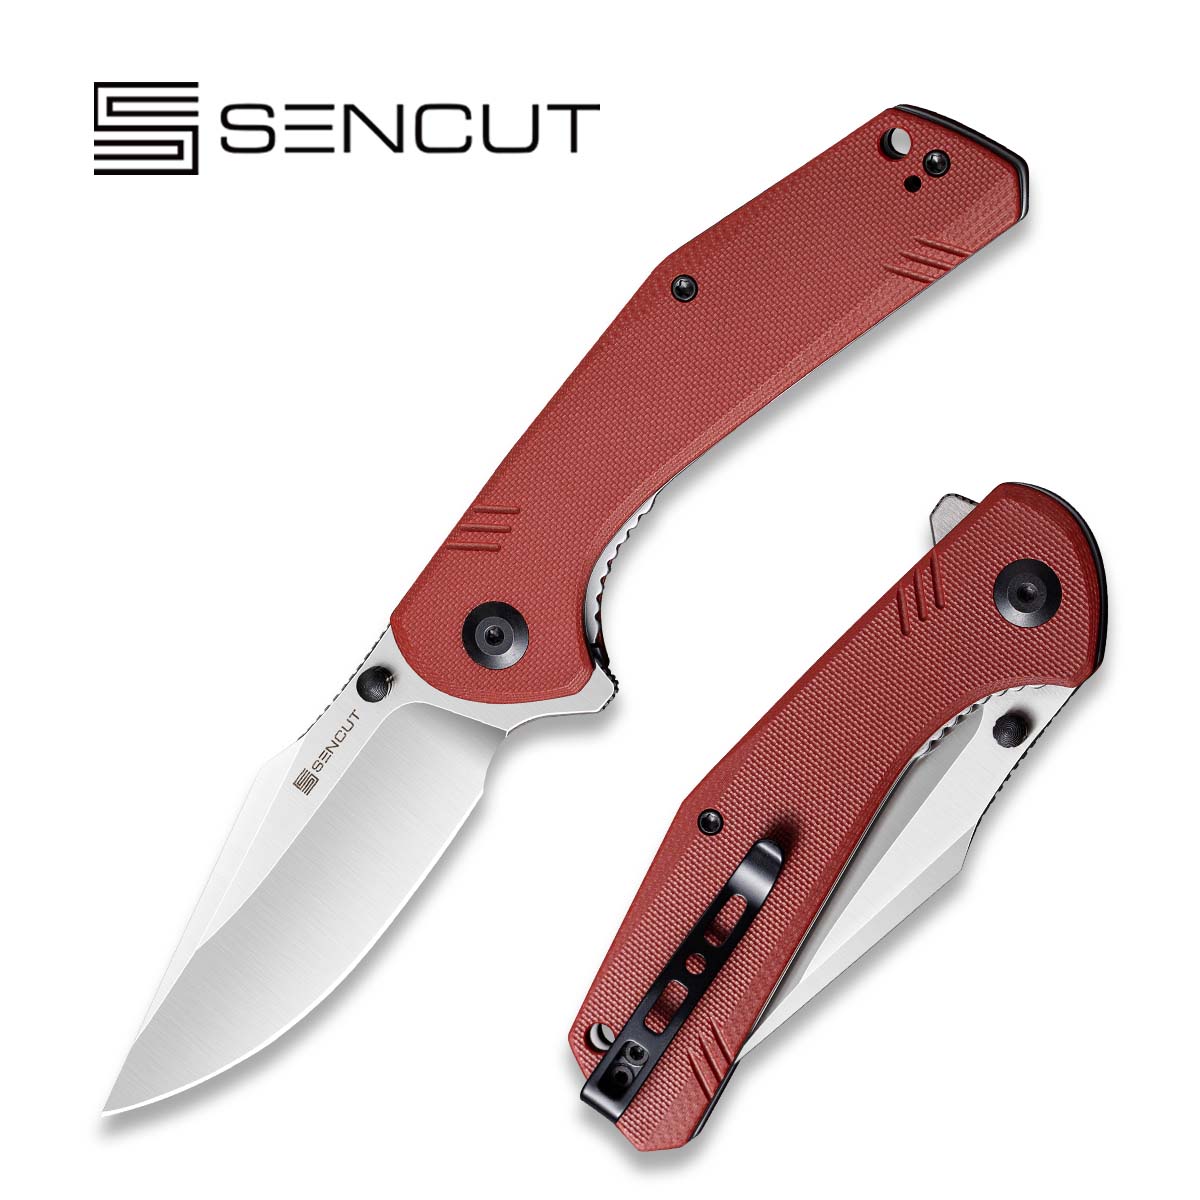 High End LC29N Flipper Folding Knife D2 Satin Drop Point Blade CNC G10  Handle Ball Bearing Fast Open Knives From Allvin17, $41.32